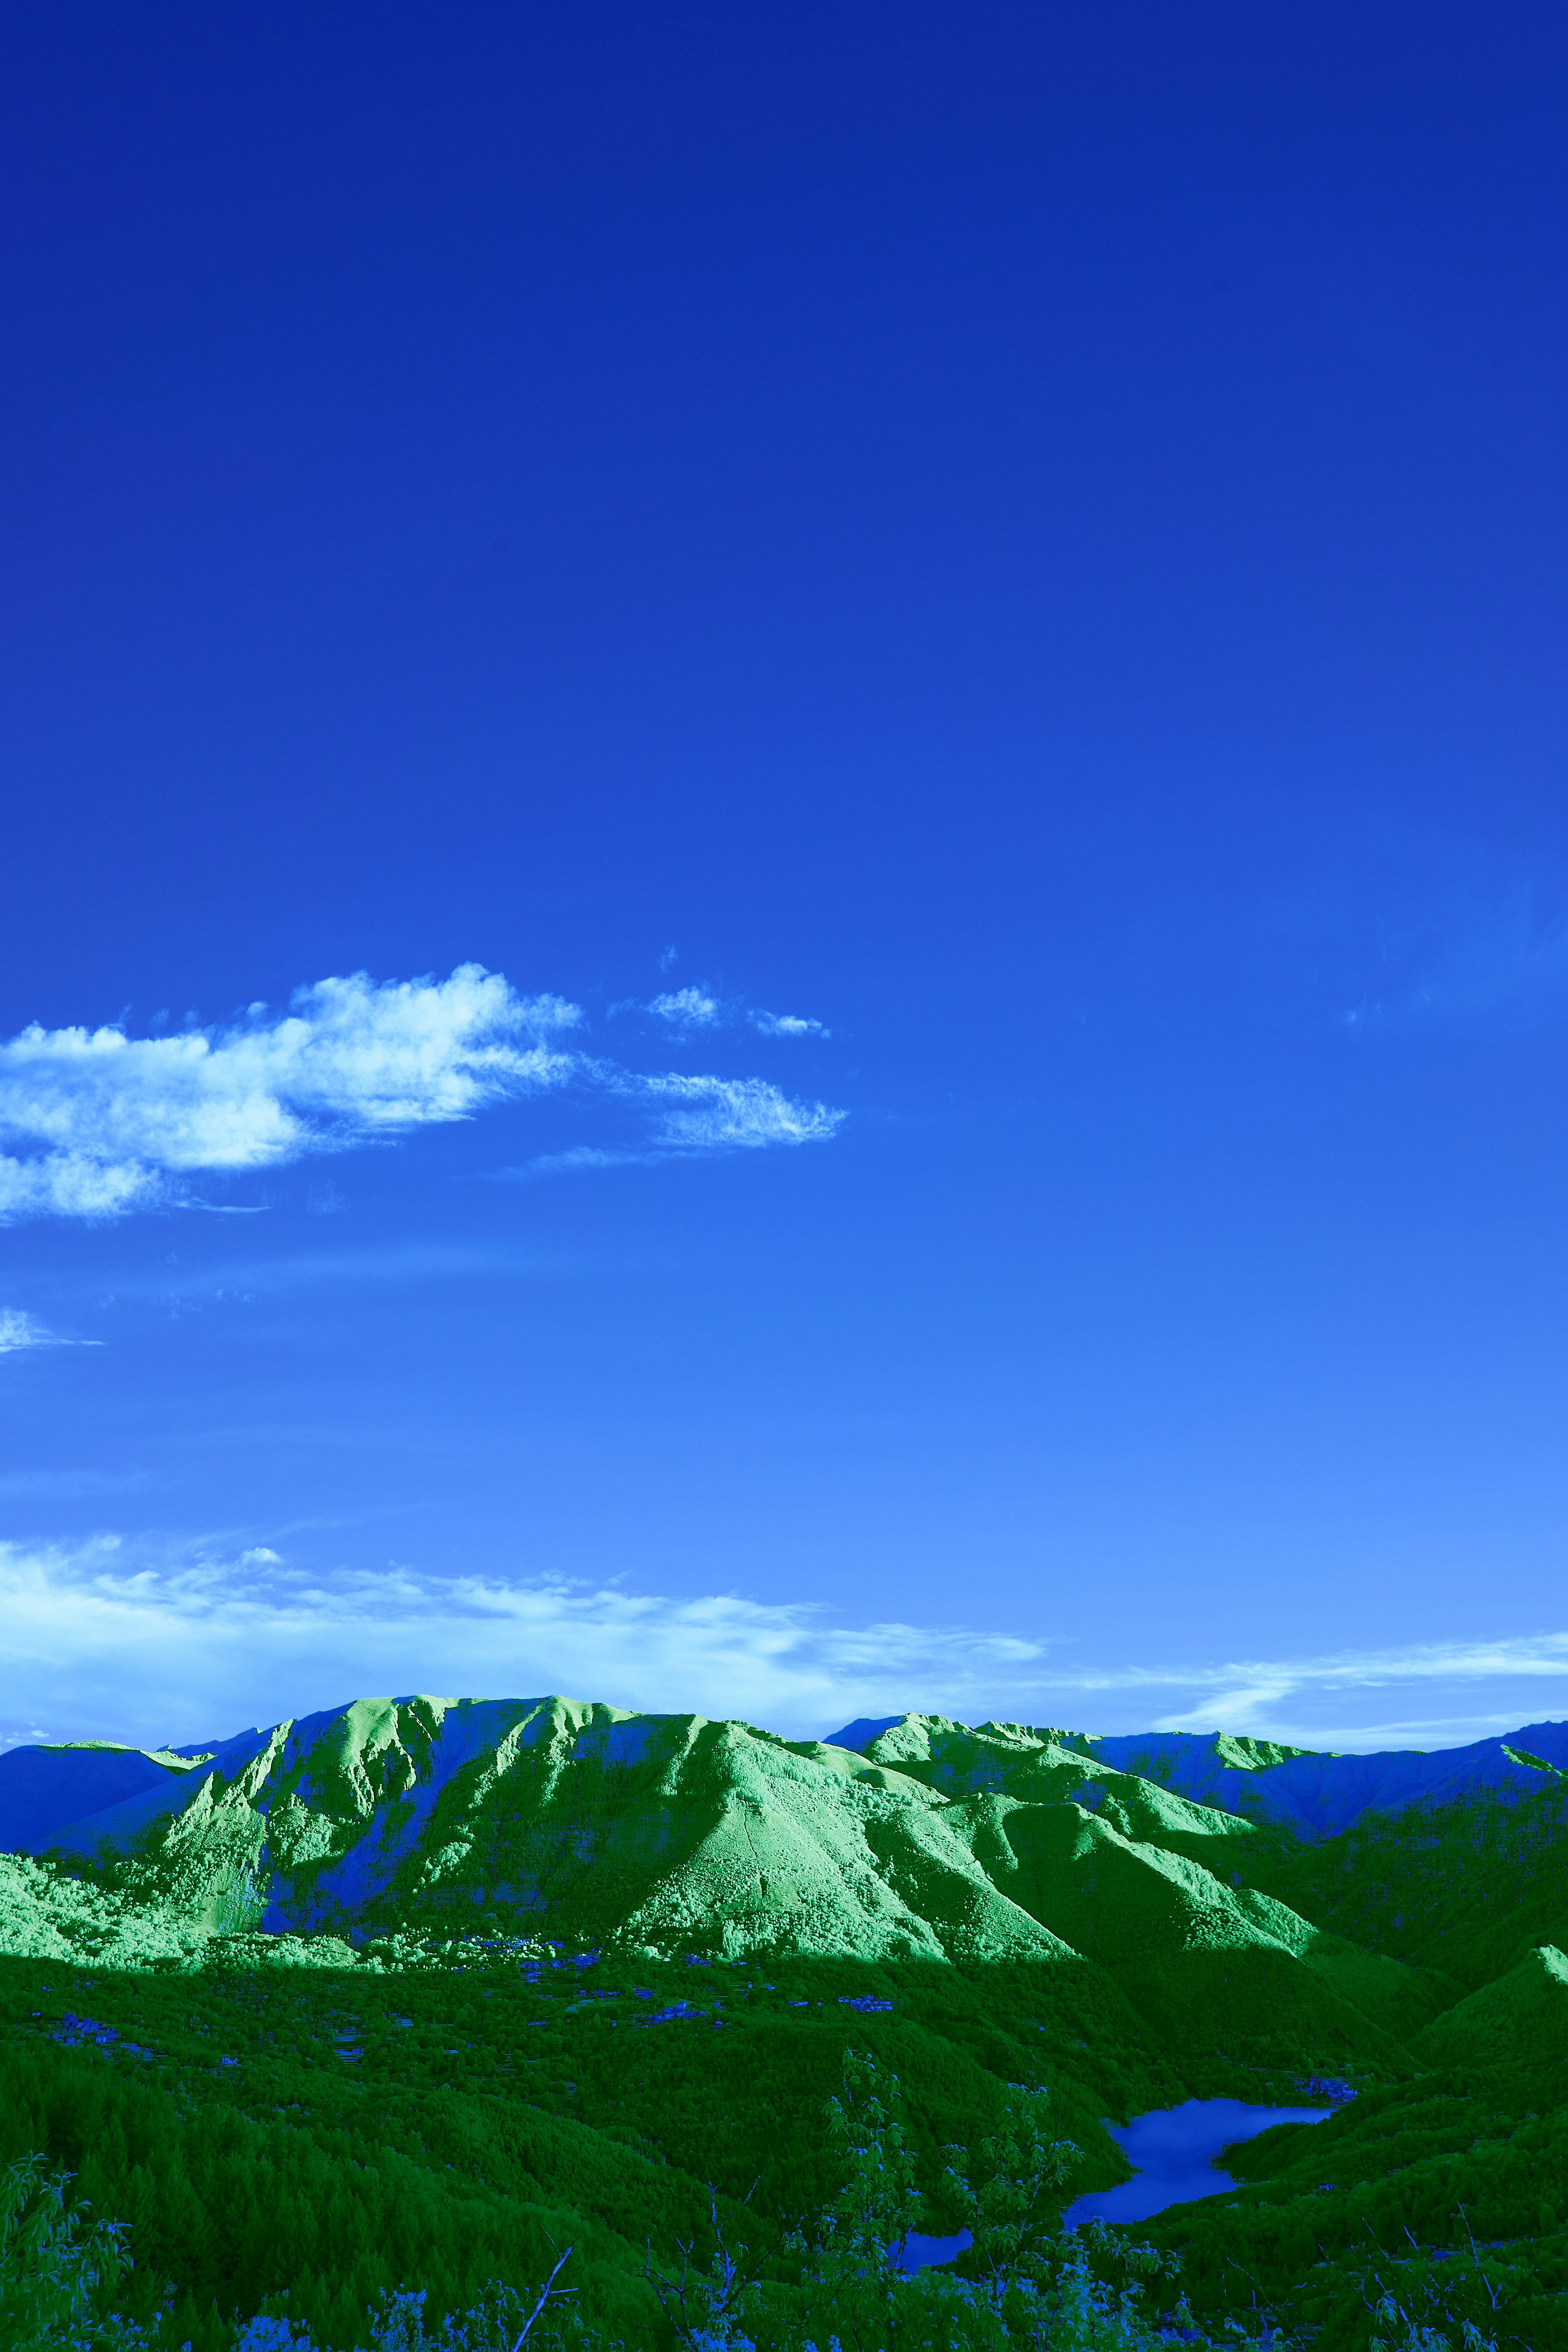 green mountains under blue sky during daytime